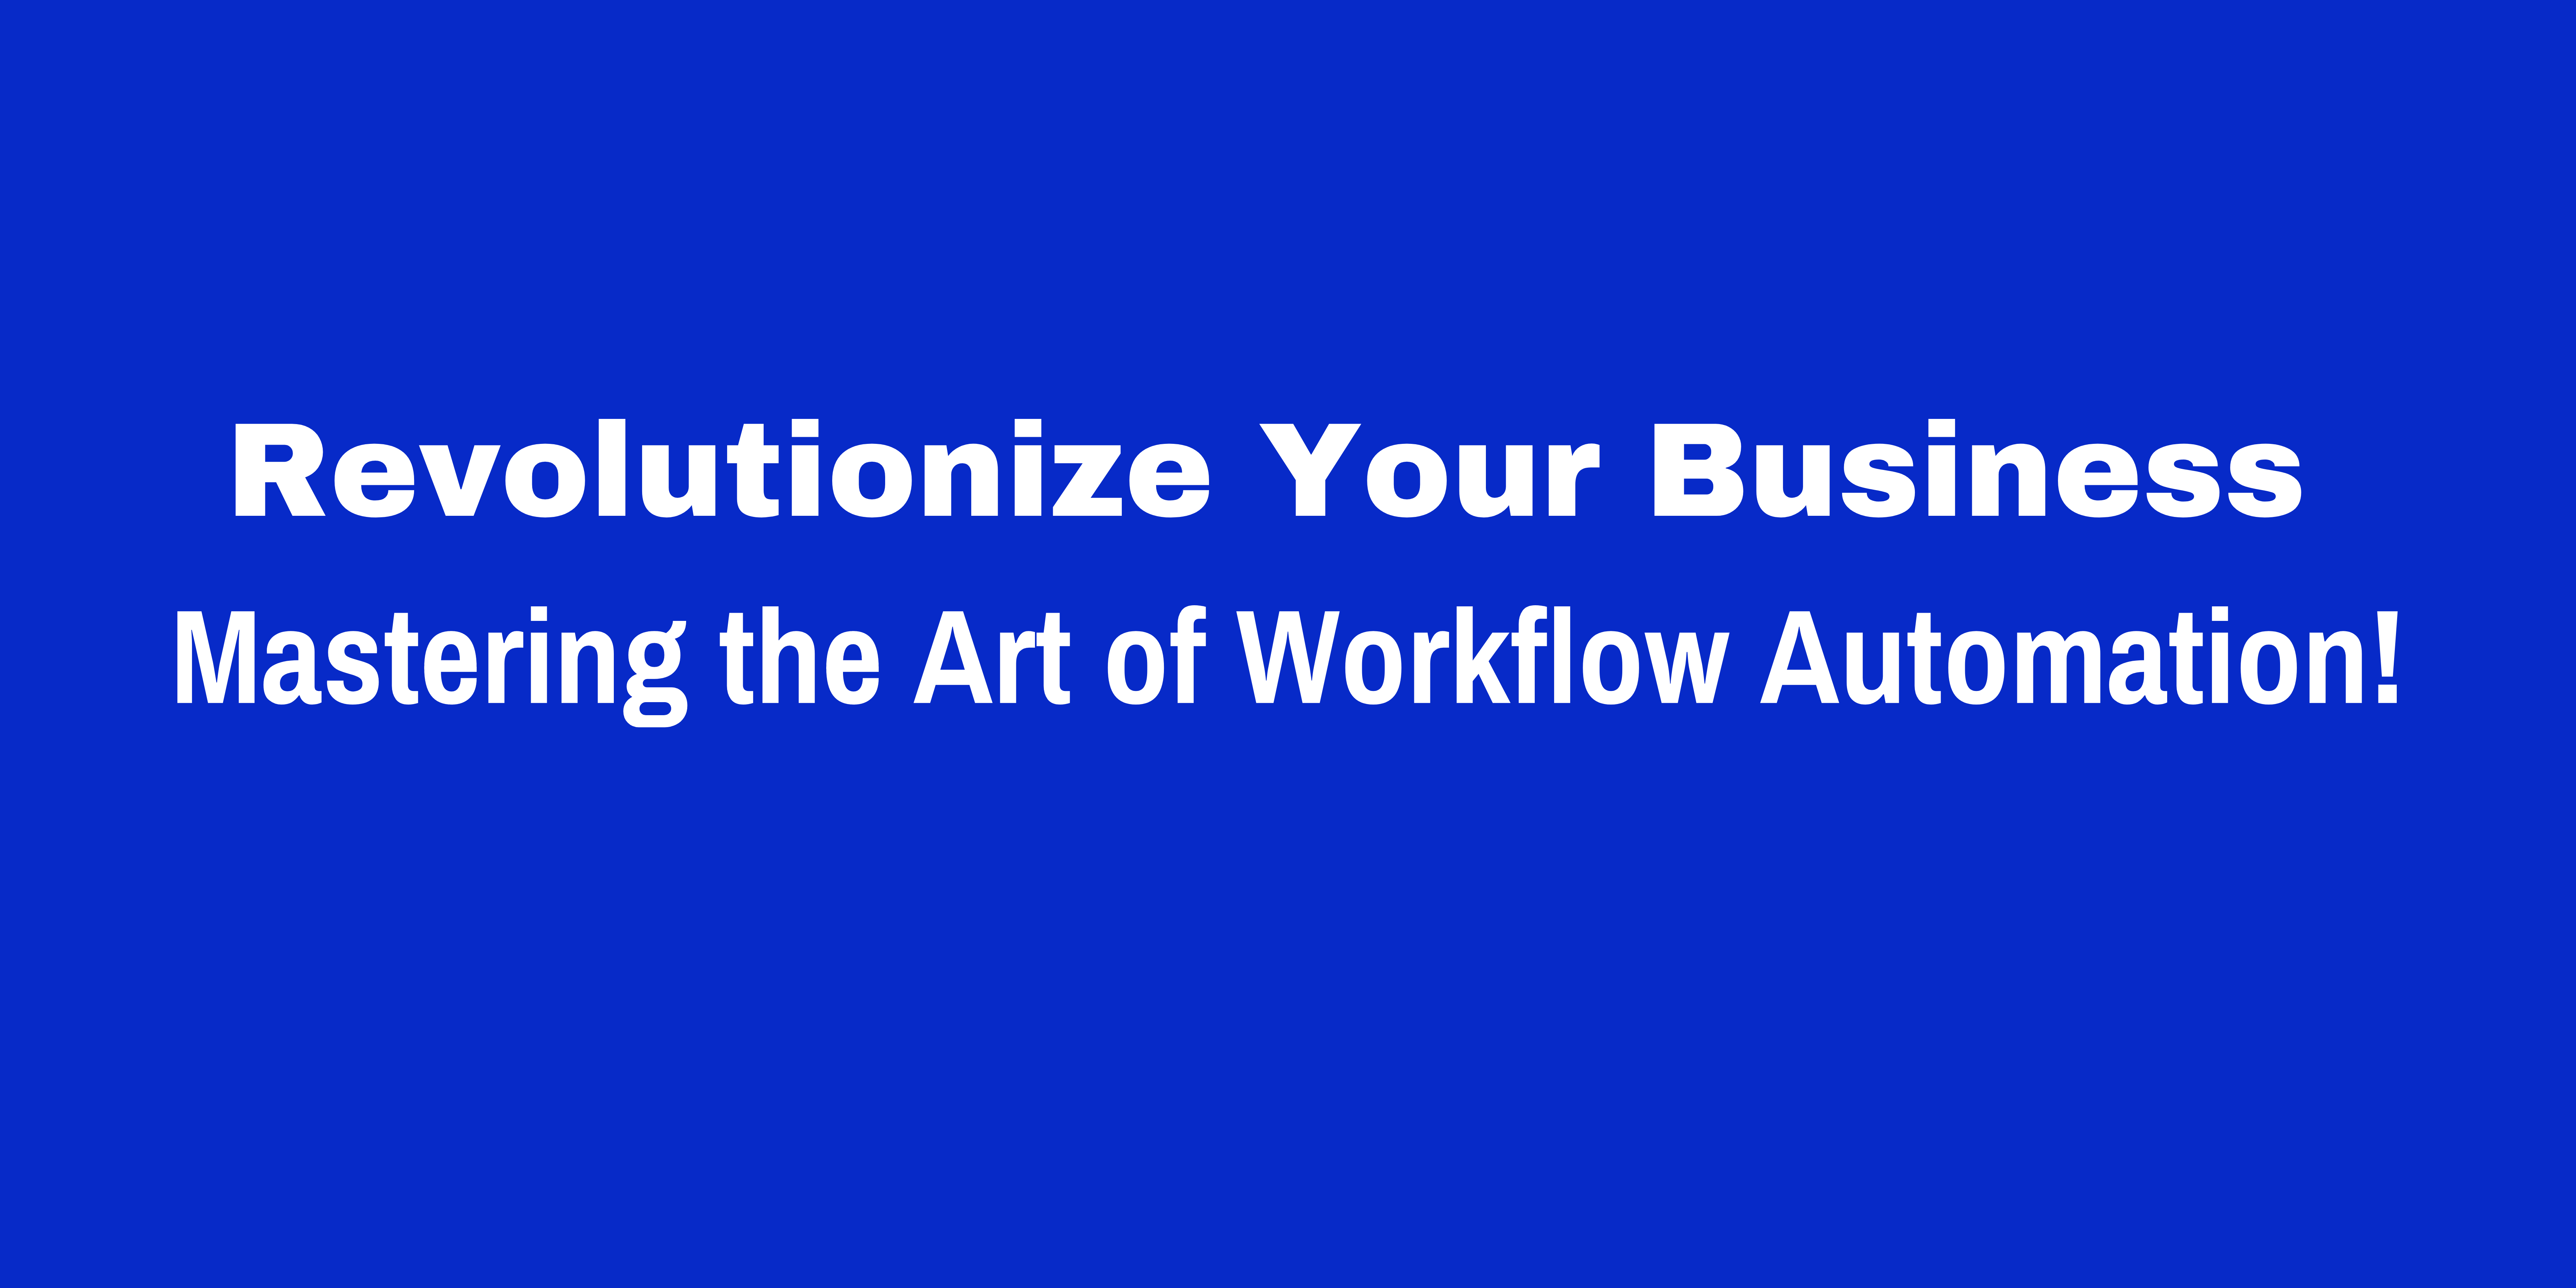 Revolutionize Your Business Mastering the Art of Workflow Automation1